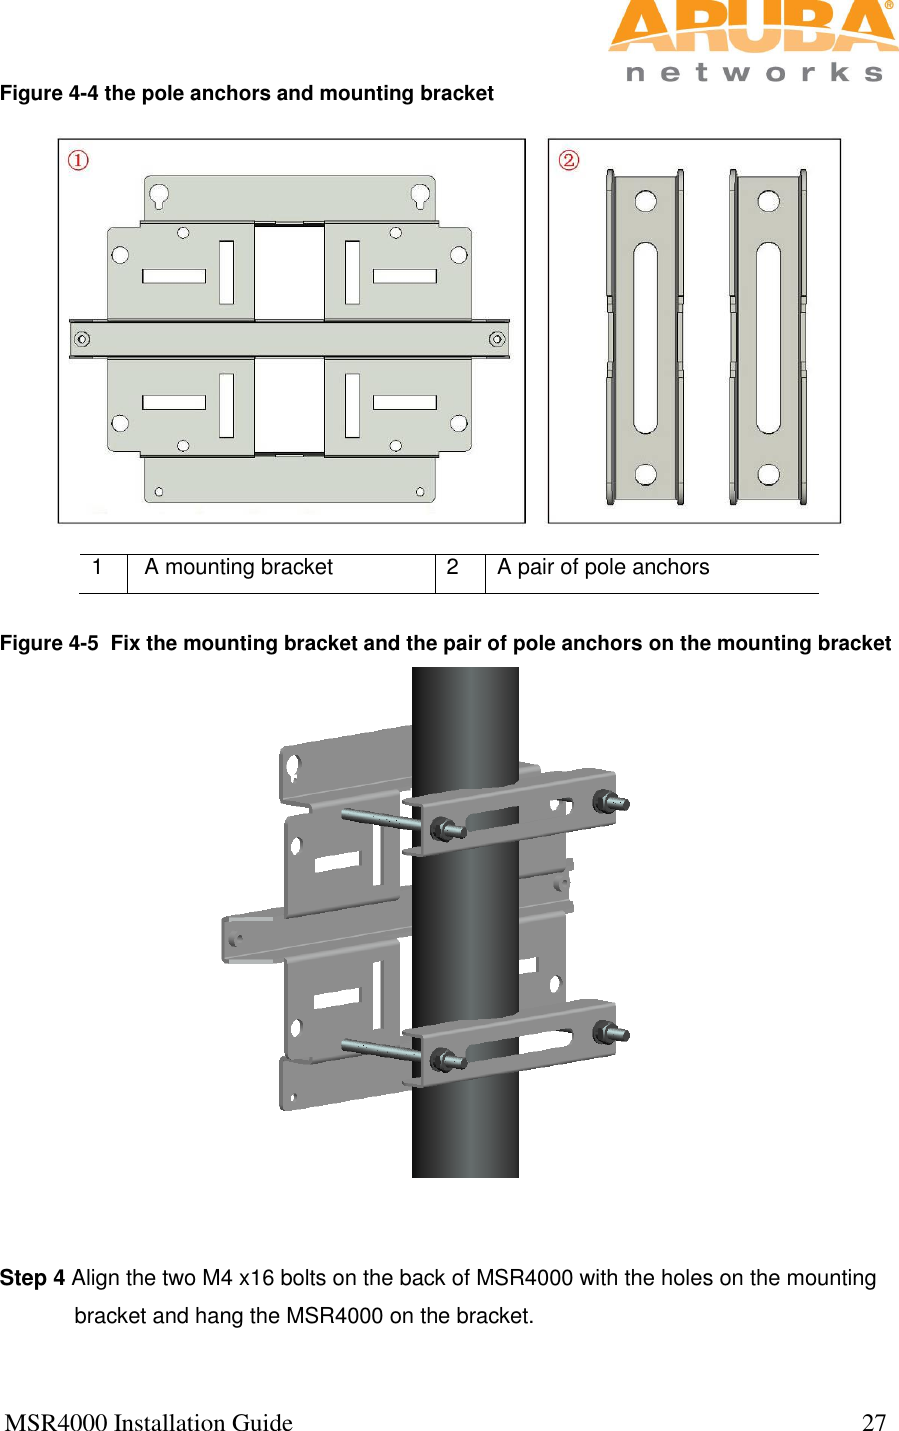  MSR4000 Installation Guide                                                                                           27  Figure 4-4 the pole anchors and mounting bracket  1  A mounting bracket 2 A pair of pole anchors  Figure 4-5  Fix the mounting bracket and the pair of pole anchors on the mounting bracket         Step 4 Align the two M4 x16 bolts on the back of MSR4000 with the holes on the mounting bracket and hang the MSR4000 on the bracket. 